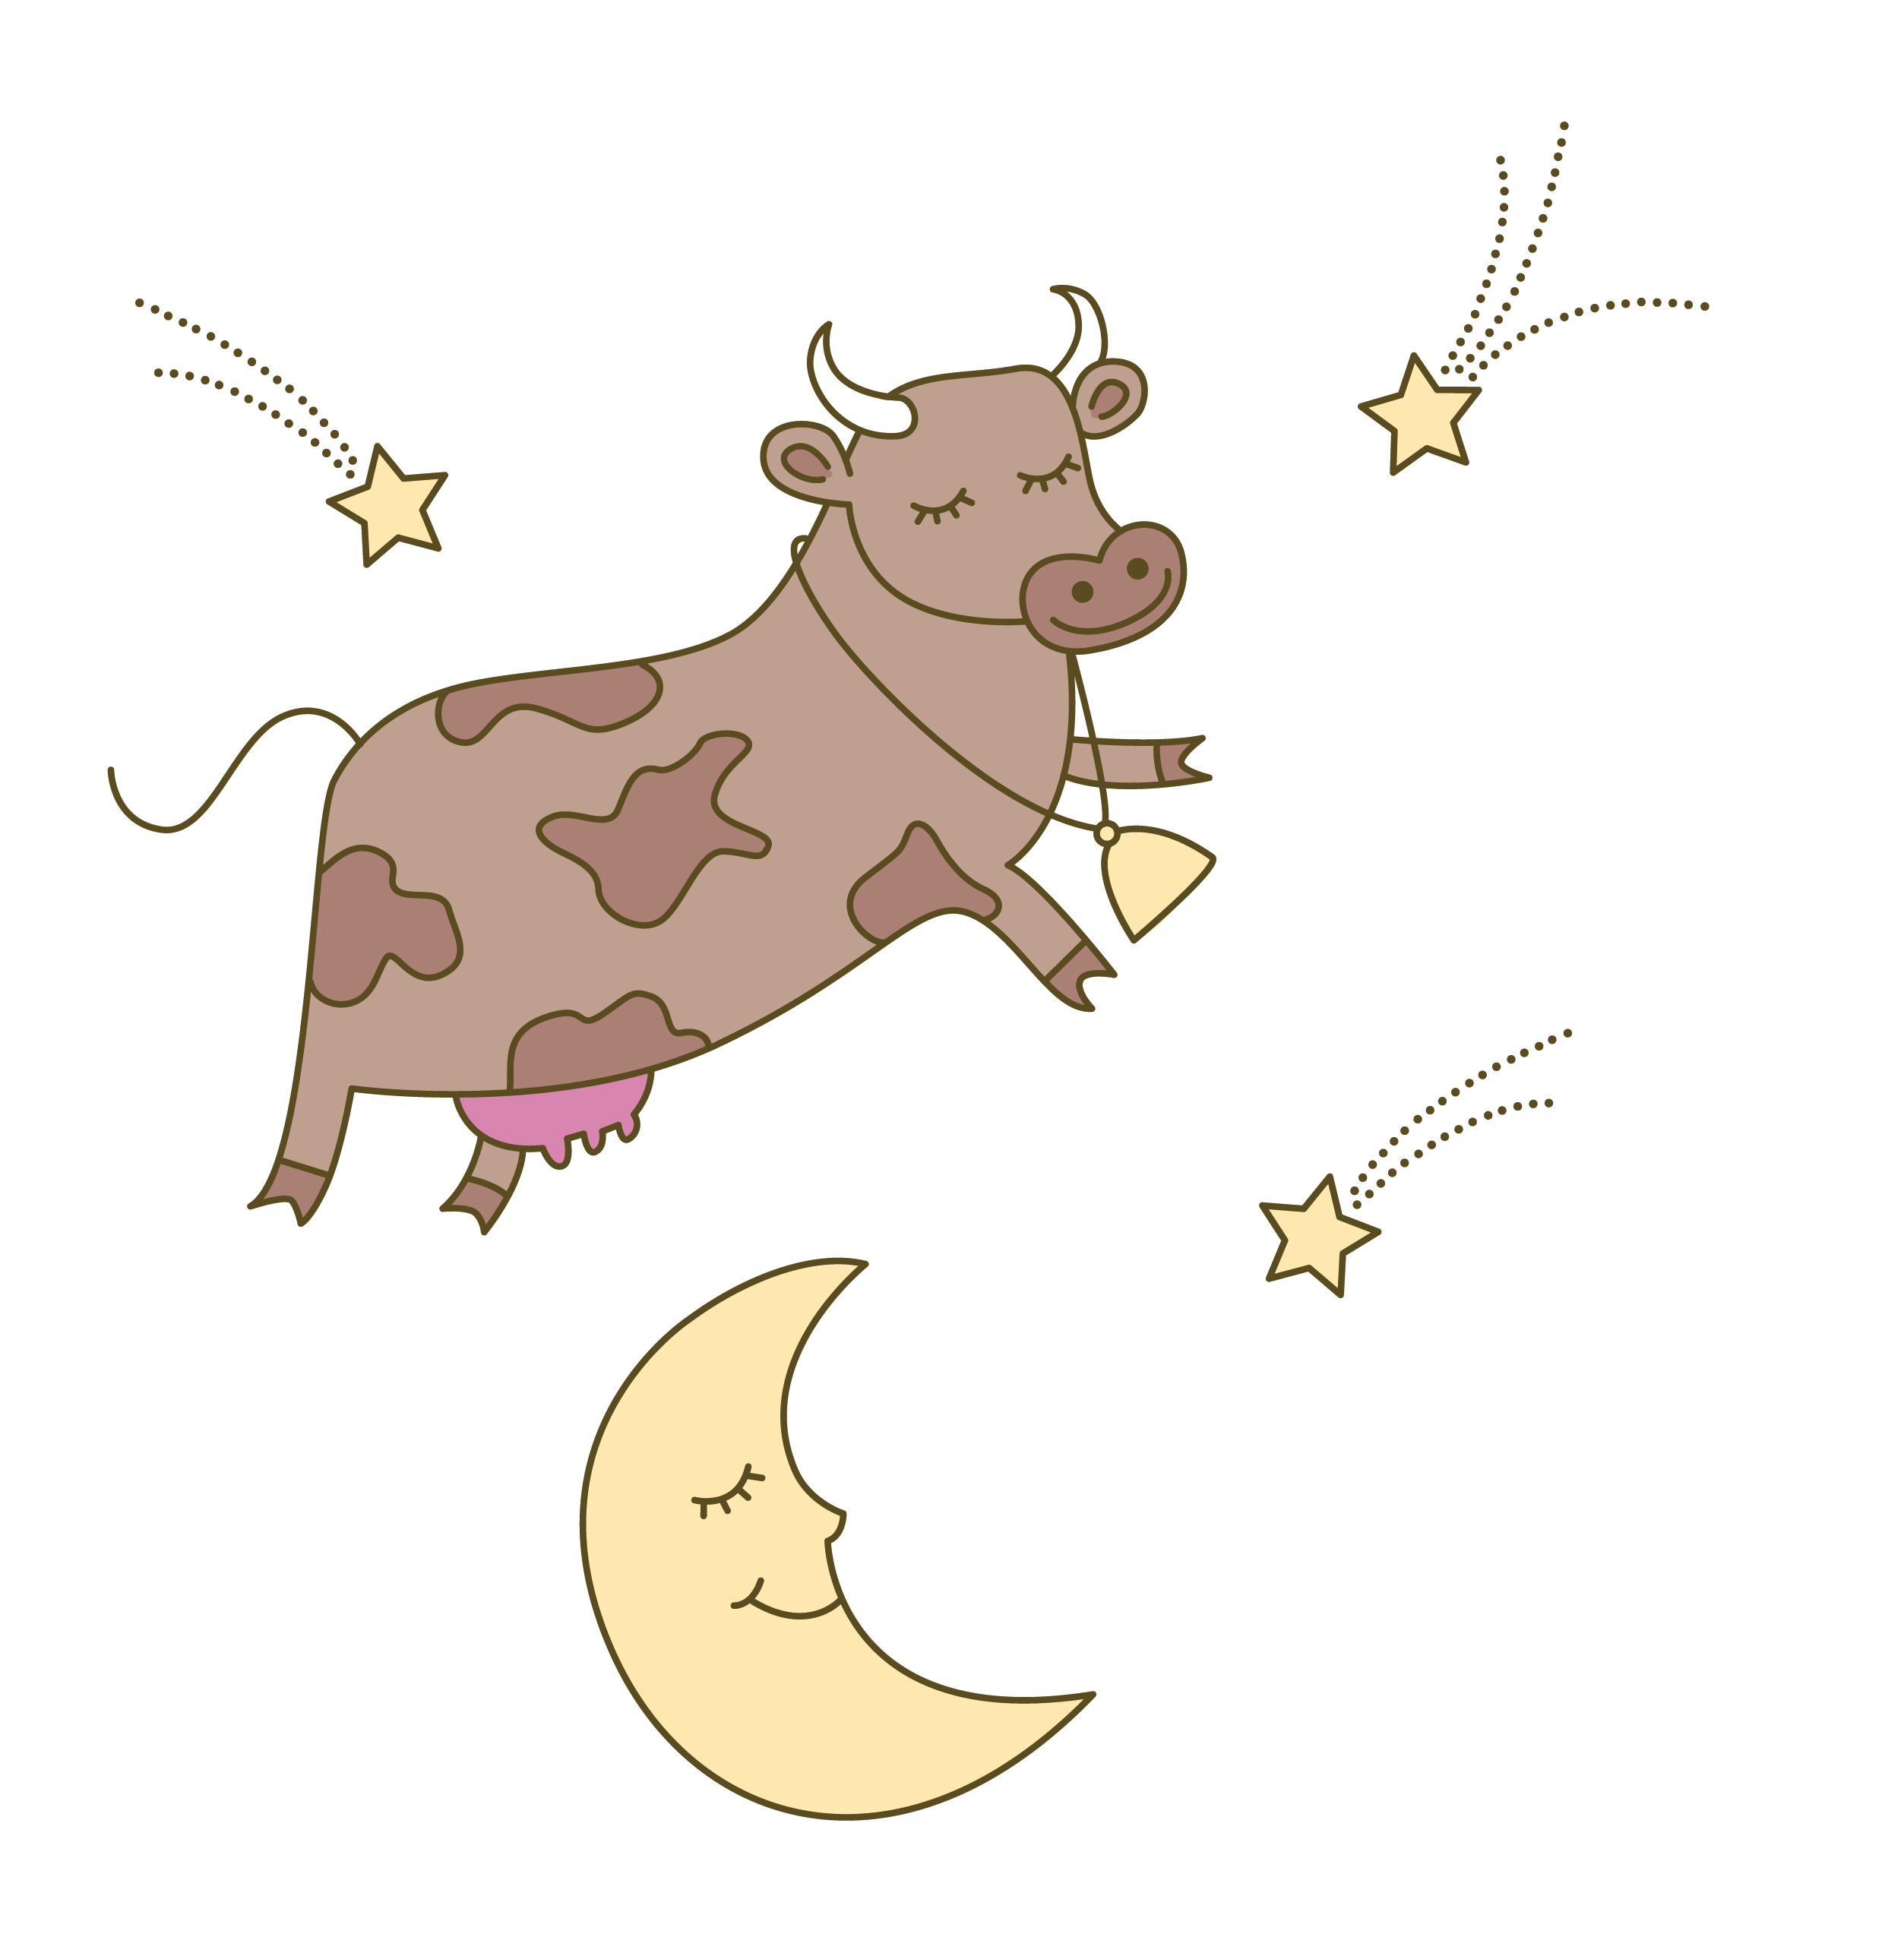 The cow jumped over the moon illustration.